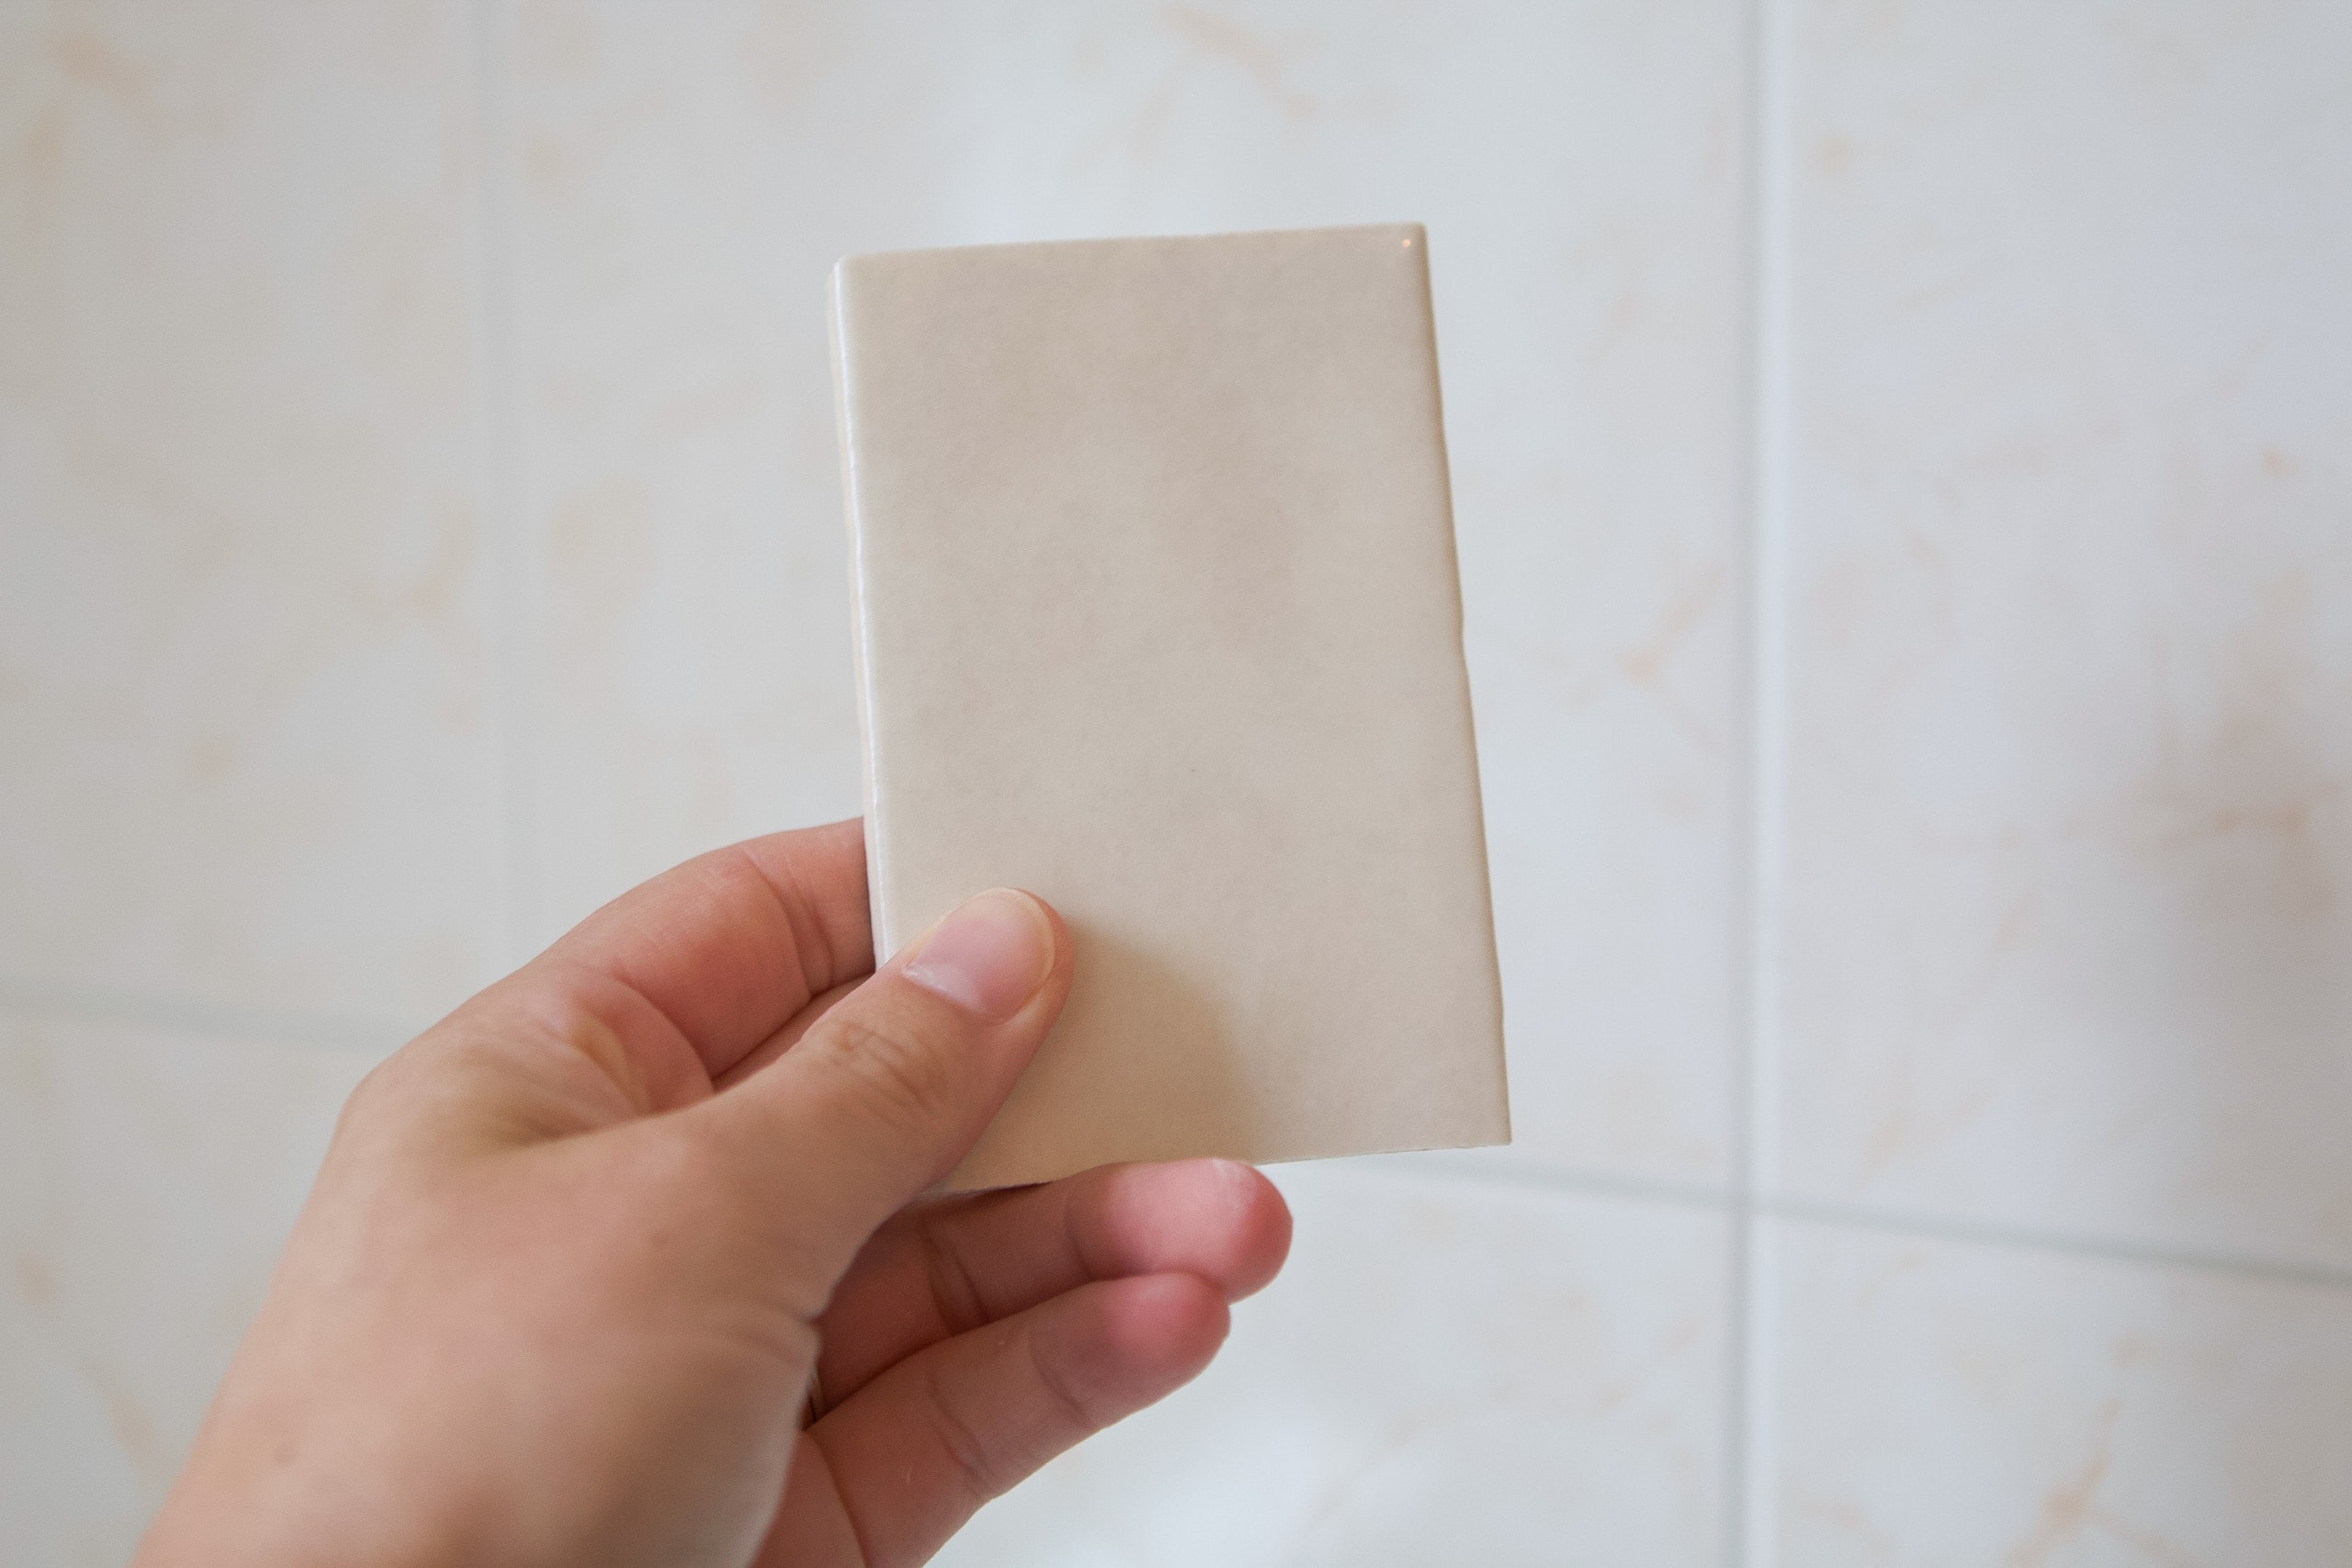 Choosing a new shower tile for our bathroom